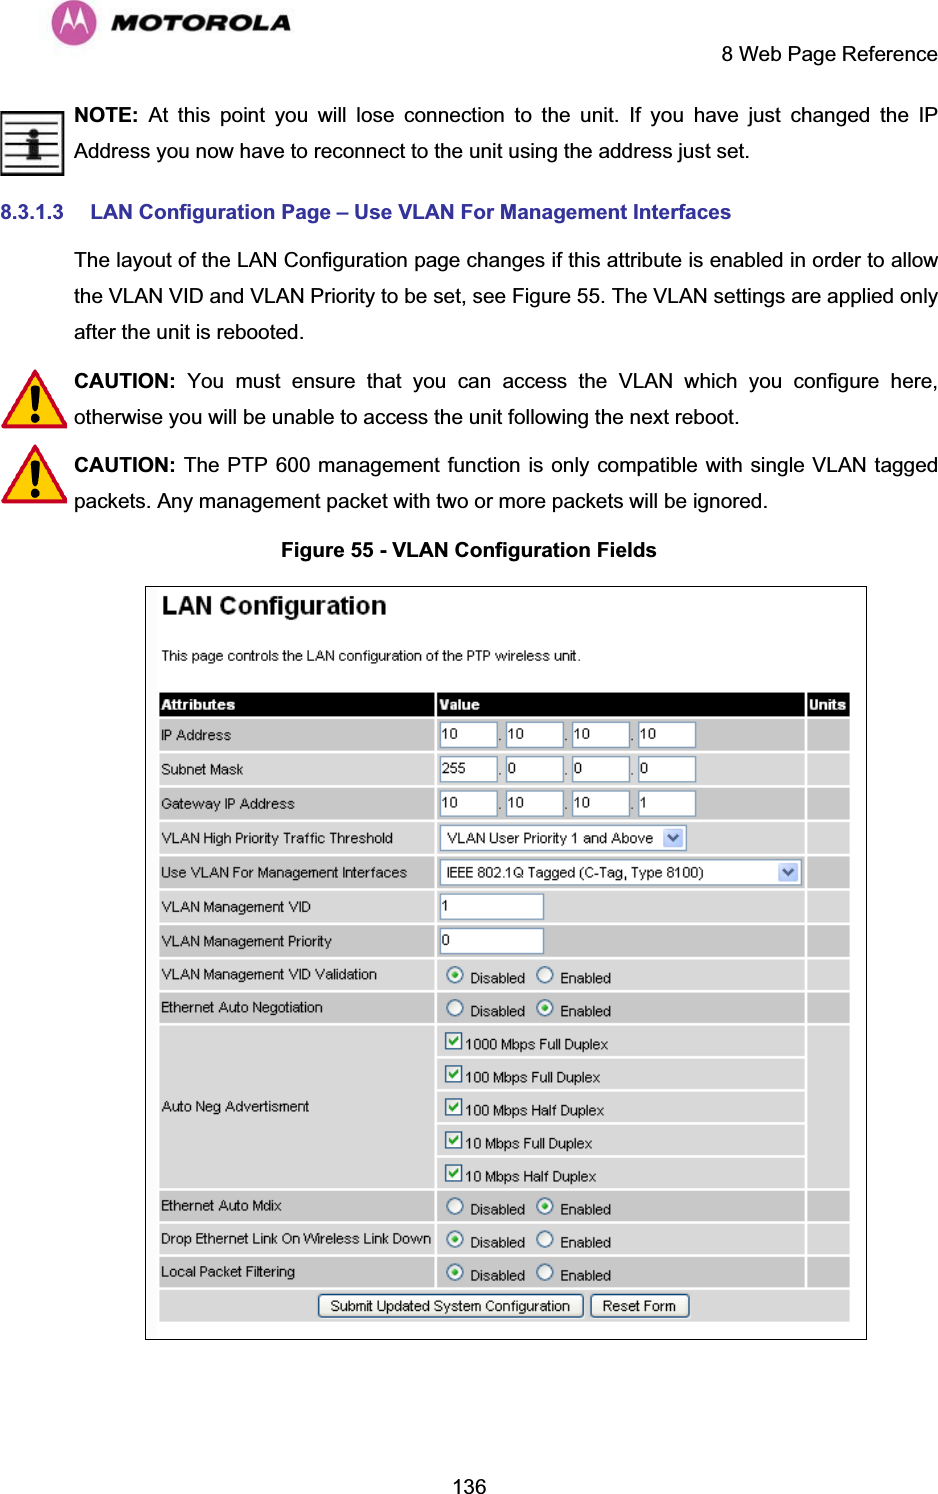     8 Web Page Reference  136NOTE: At this point you will lose connection to the unit. If you have just changed the IP Address you now have to reconnect to the unit using the address just set. 8.3.1.3  LAN Configuration Page – Use VLAN For Management Interfaces The layout of the LAN Configuration page changes if this attribute is enabled in order to allow the VLAN VID and VLAN Priority to be set, see Figure 55. The VLAN settings are applied only after the unit is rebooted. CAUTION:  You must ensure that you can access the VLAN which you configure here, otherwise you will be unable to access the unit following the next reboot. CAUTION: The PTP 600 management function is only compatible with single VLAN tagged packets. Any management packet with two or more packets will be ignored. Figure 55 - VLAN Configuration Fields   